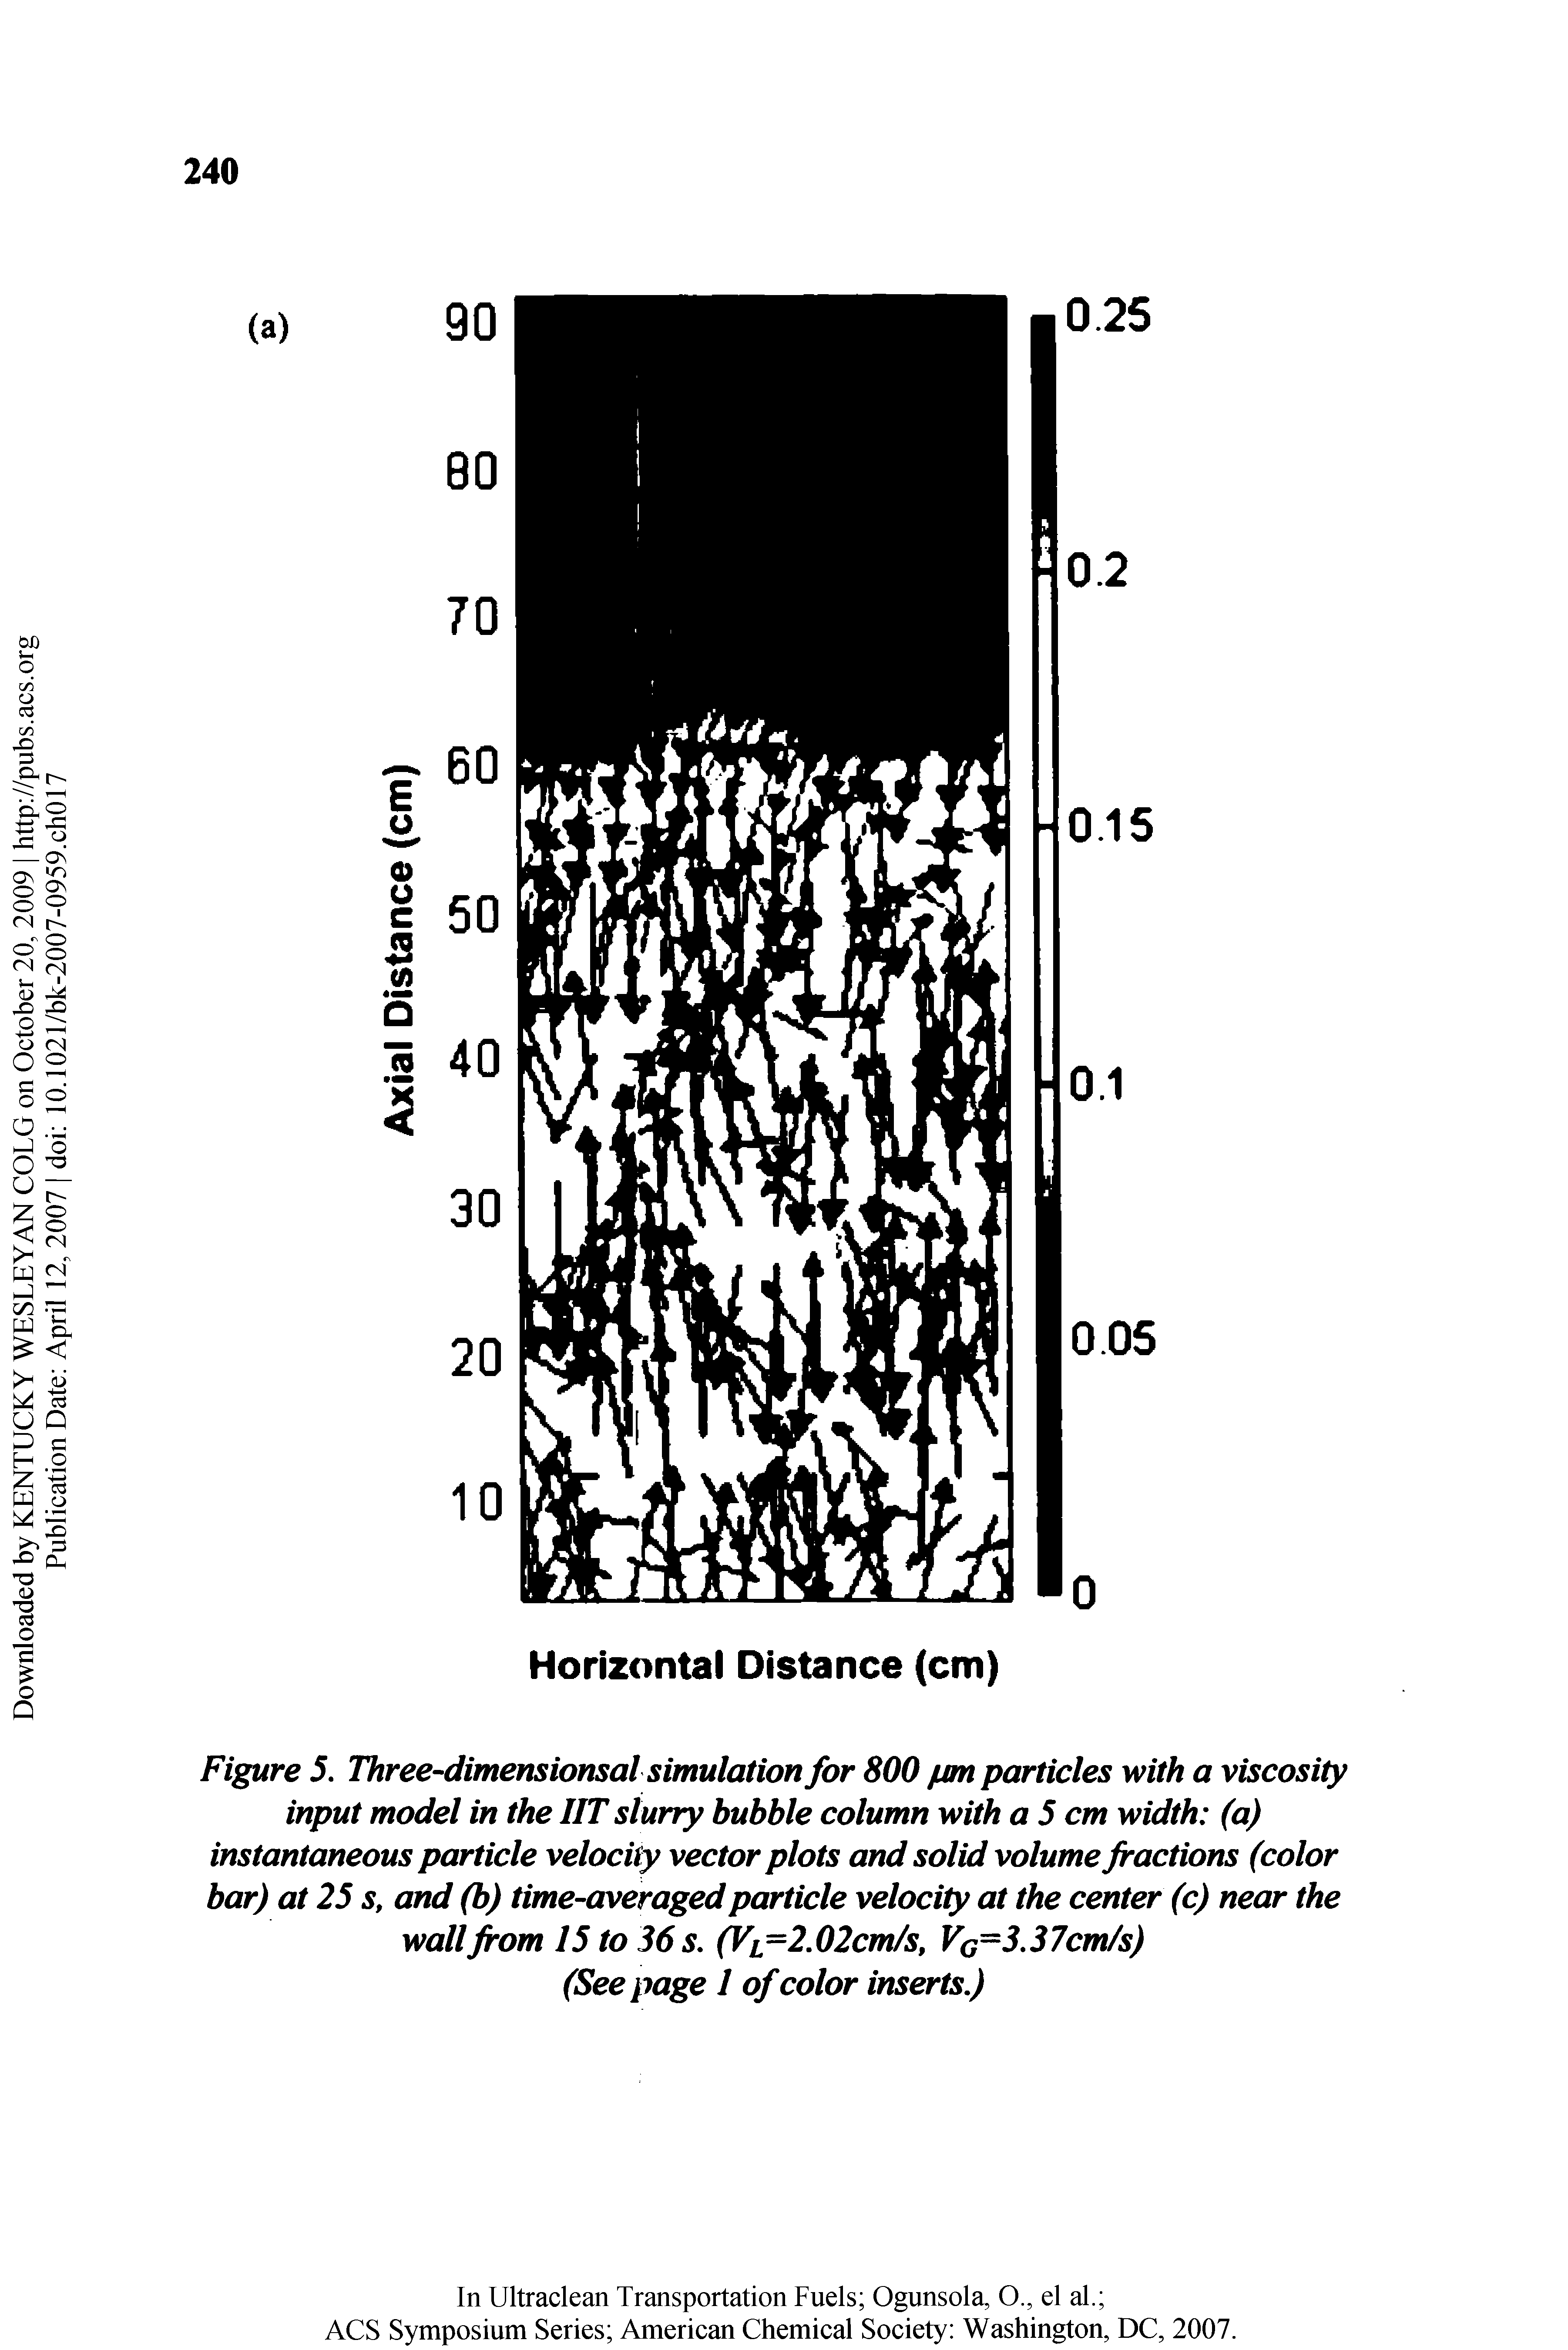 Figure 5. Three-dimensionsal simulation for 800 /jm particles with a viscosity input model in the IIT slurry bubble column with a 5 cm width (a) instantaneous particle velocity vector plots and solid volume fractions (color bar) at 25 s, and (b) time-averaged particle velocity at the center (c) near the wall from 15 to 36 5. (Fi=2.02cm/s, VG=3,37cm/s)...